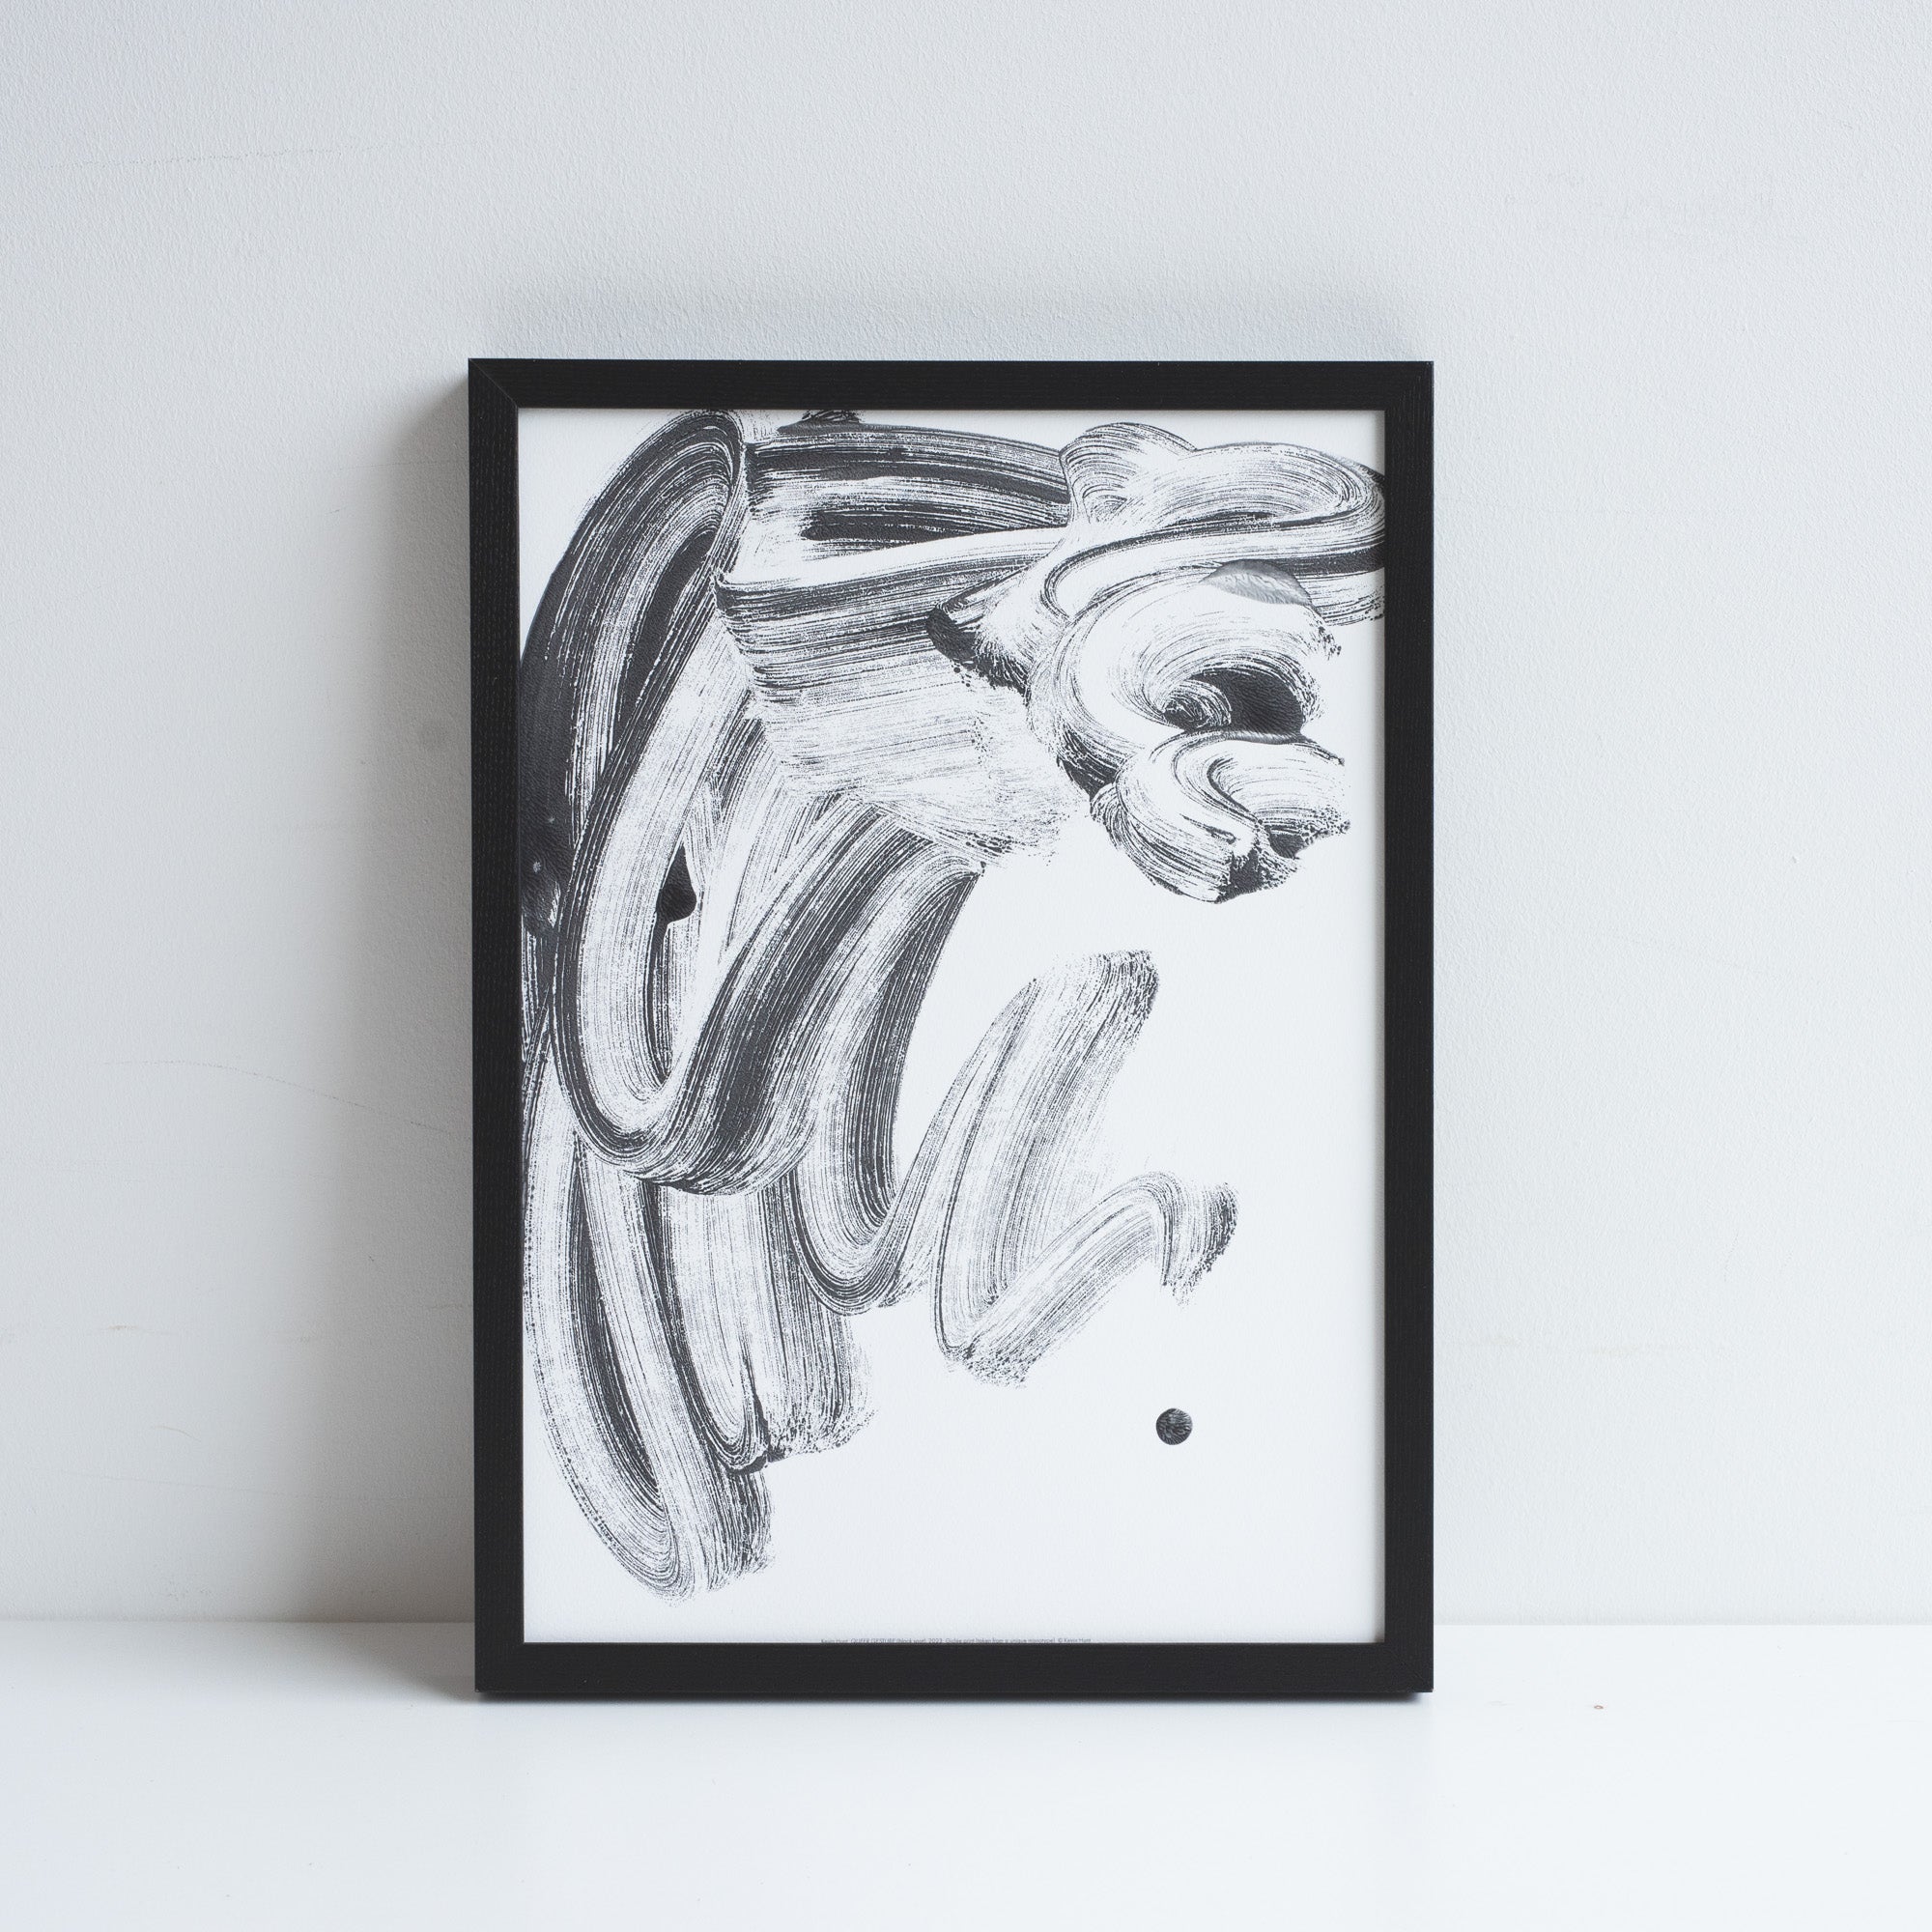 Printed reproduction of a unique Monotype by Kevin Hunt, placed in a black frame leaning against a white wall.